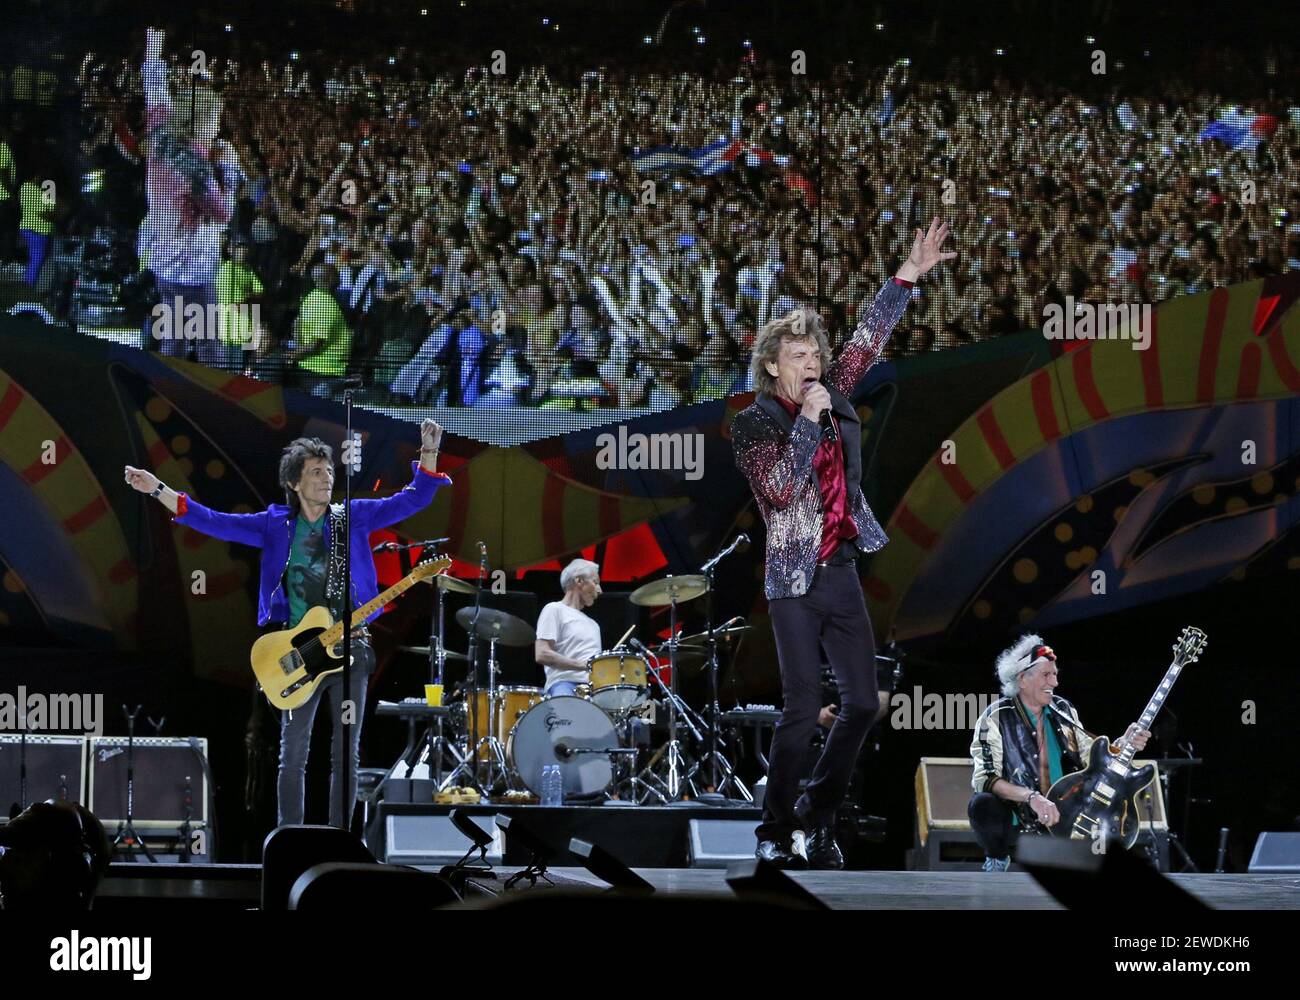 Mick Jagger and the Rolling Stones perform in the Ciudad Deportiva de la  Habana in Cuba on Friday, March 25, 2016. (Photo by Al Diaz/Miami  Herald/TNS) *** Please Use Credit from Credit